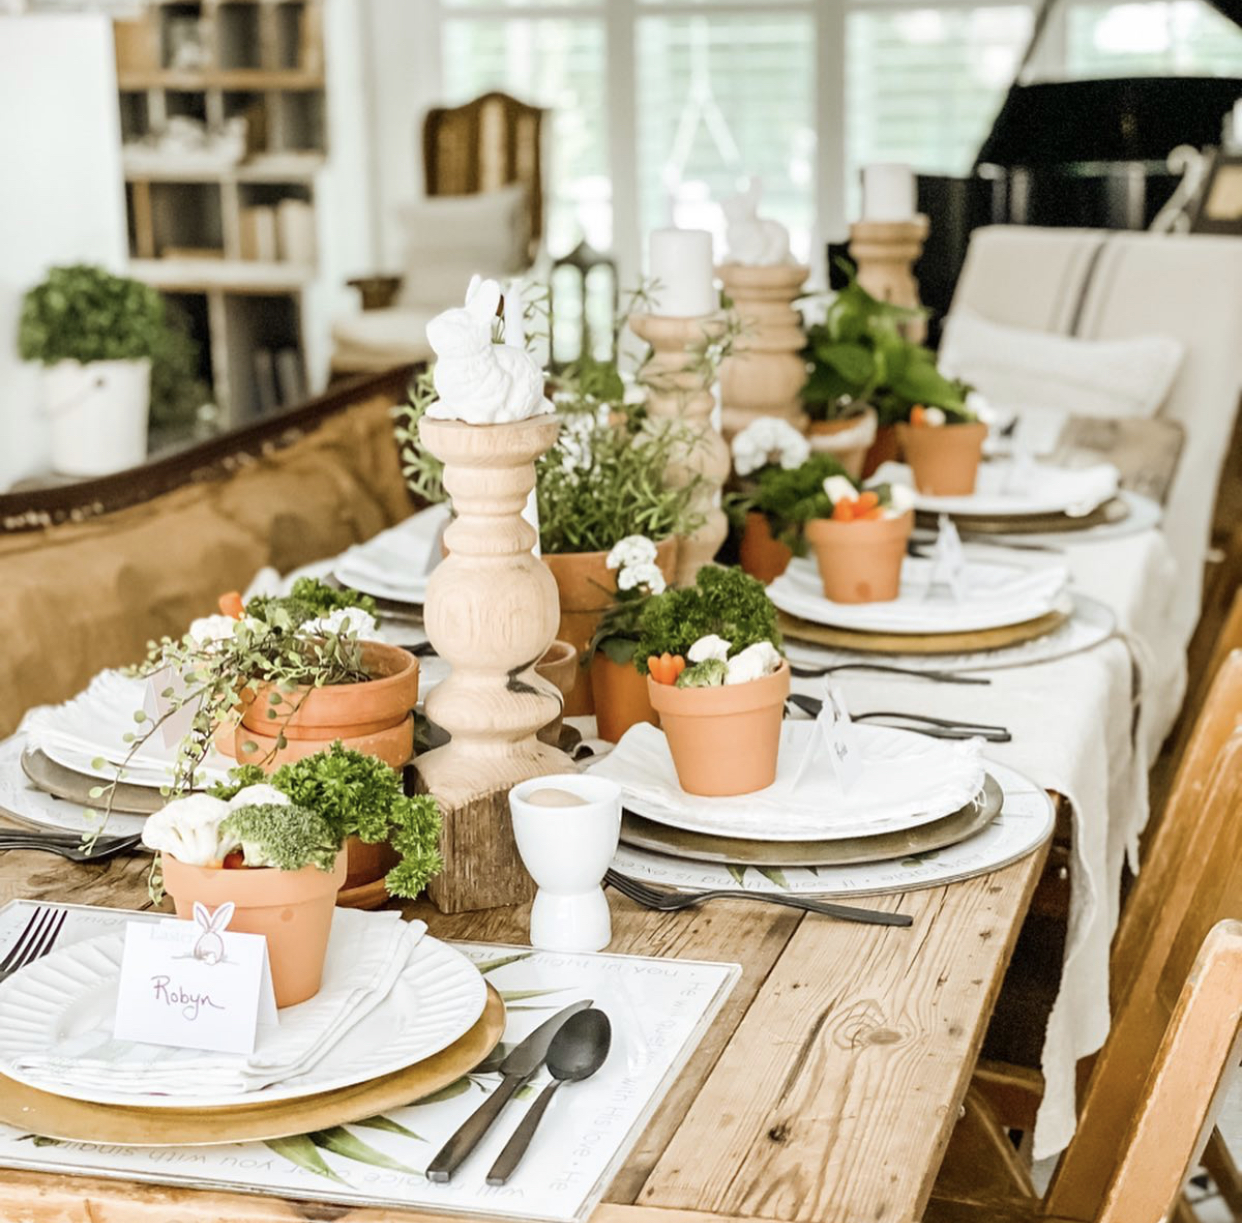 How to Use Simple Easter Table Decor Ideas for a Stress-Free Holiday